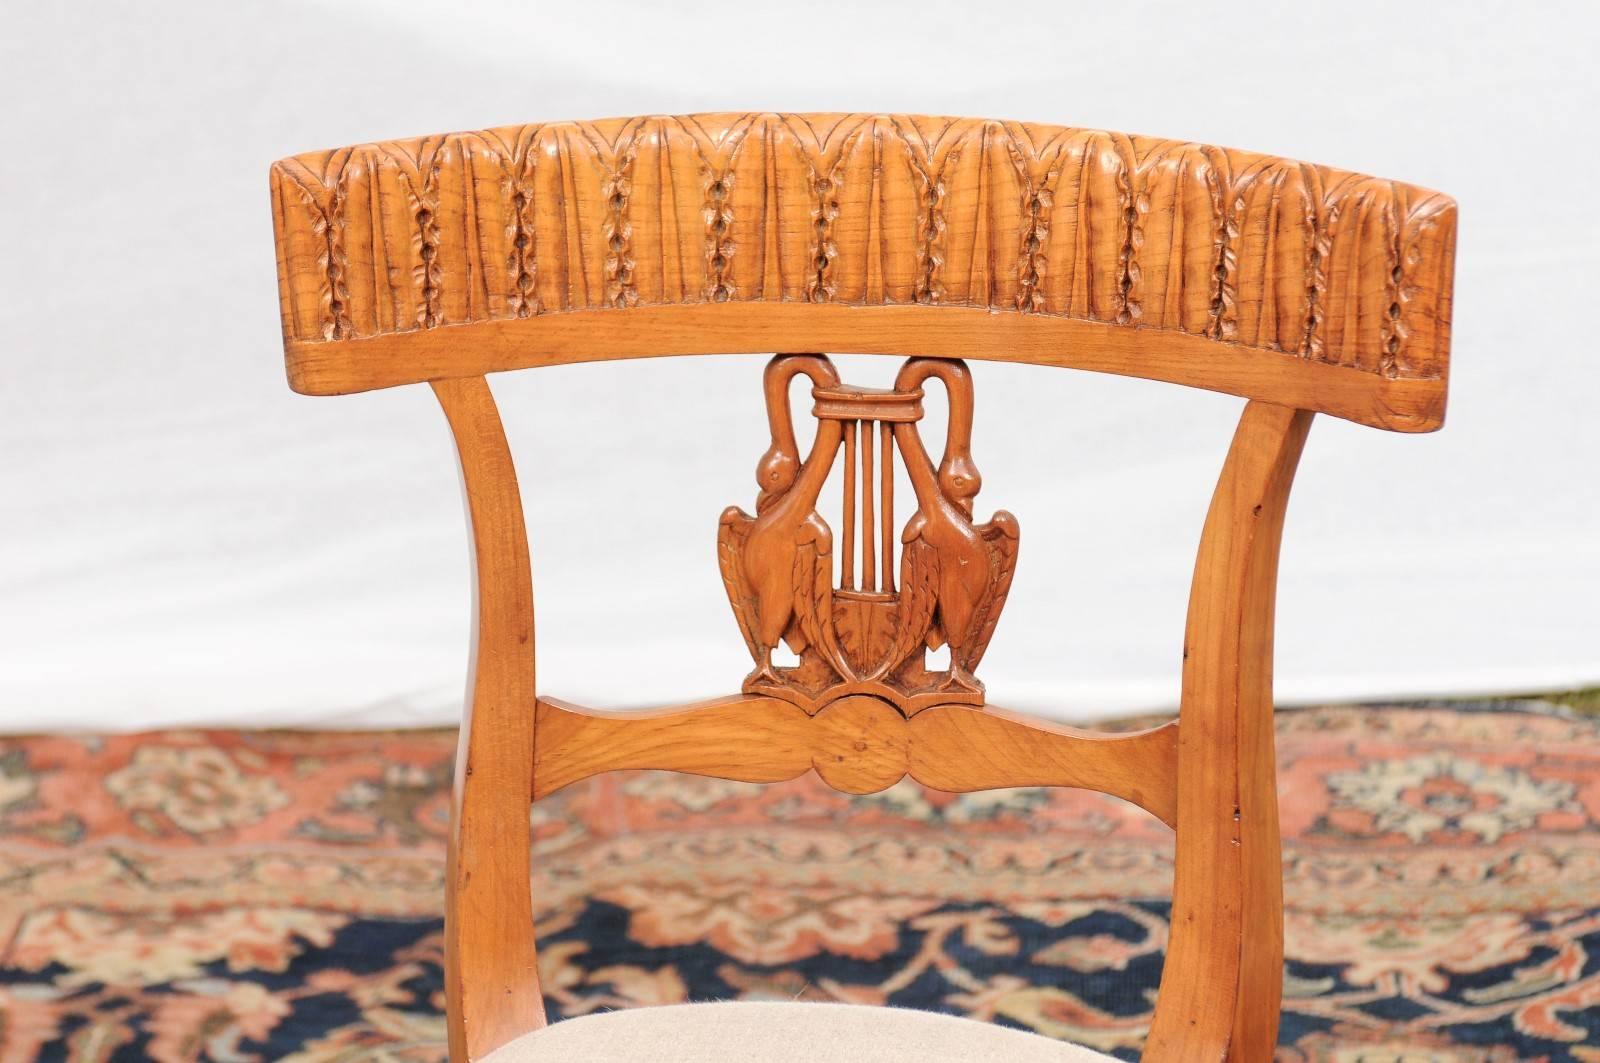 Upholstery Pair of Italian Neoclassical Side Chairs with Swans and Lyre from the 1850s For Sale